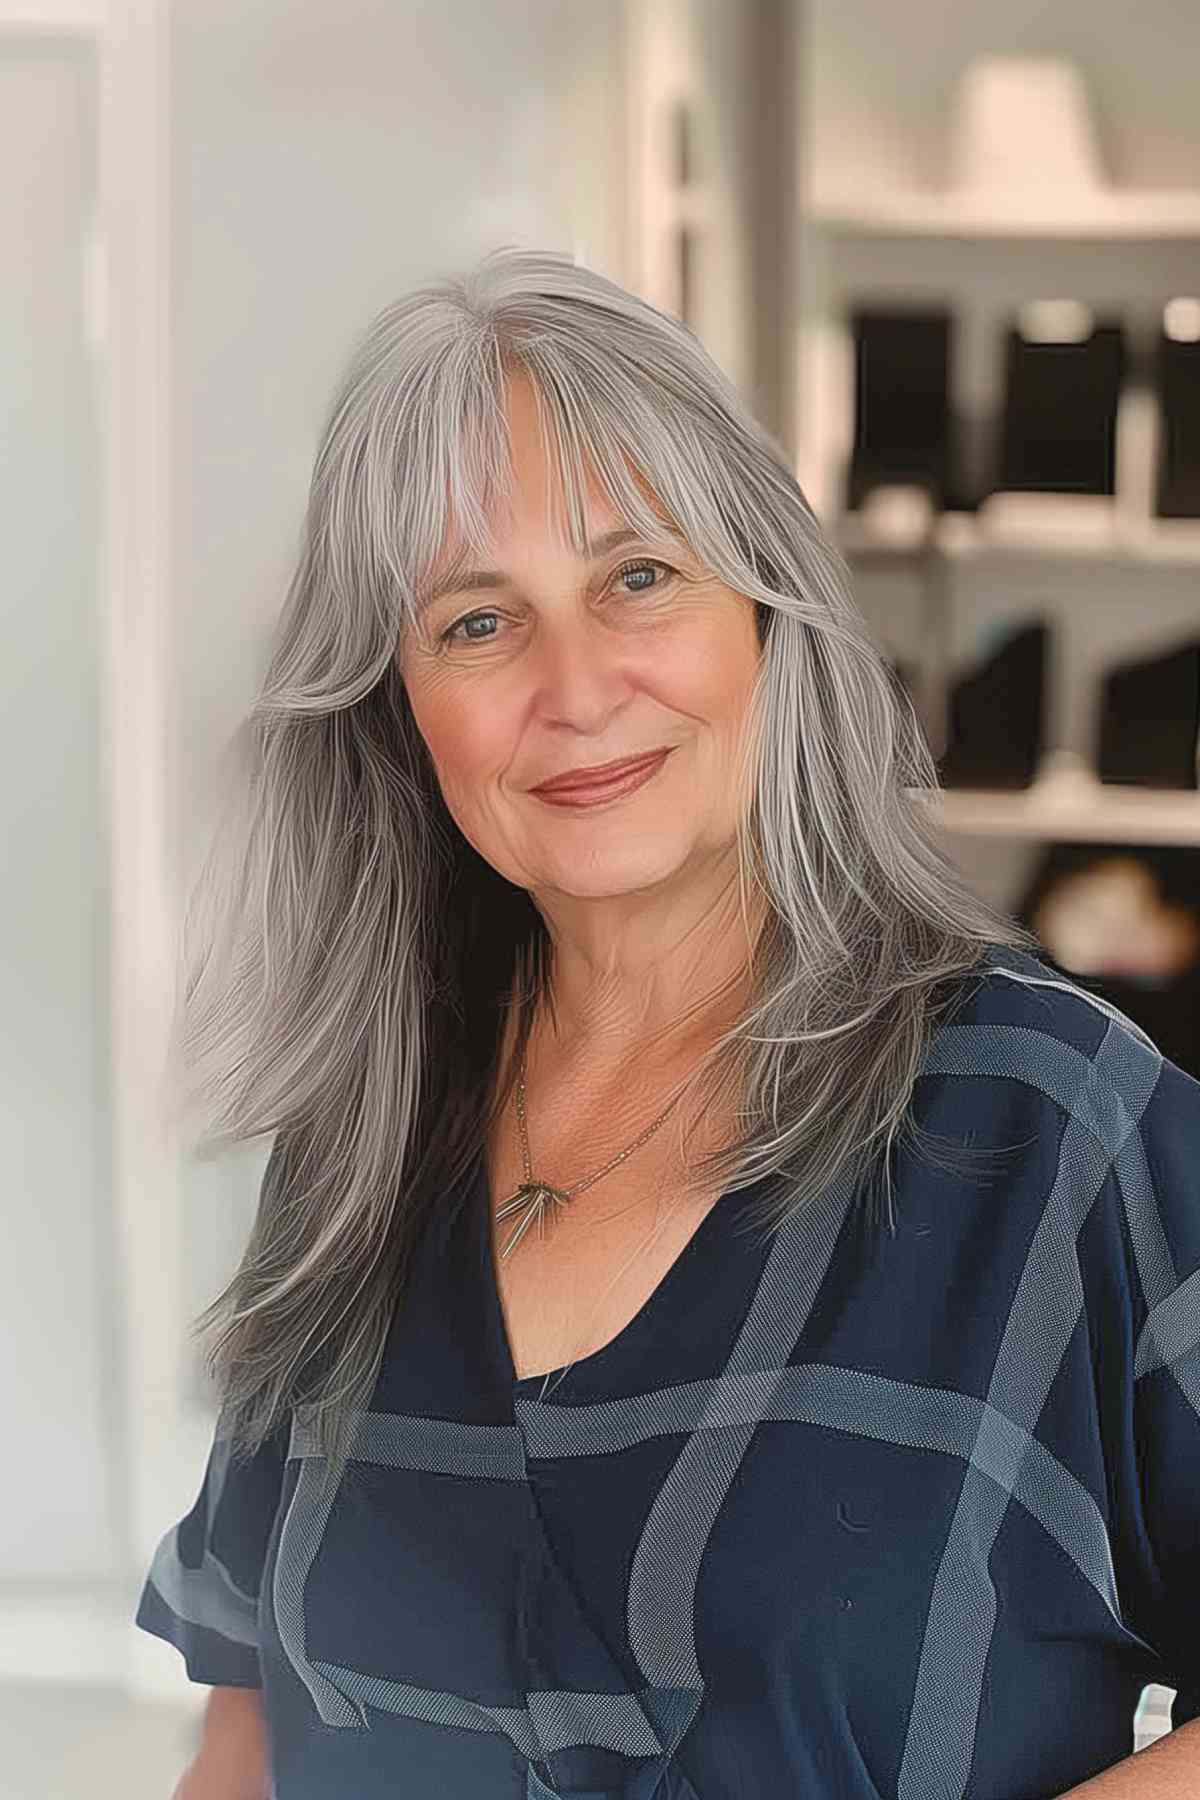 Mature woman with mid-length gray hair styled with side-swept bangs, wearing a plaid blue dress.